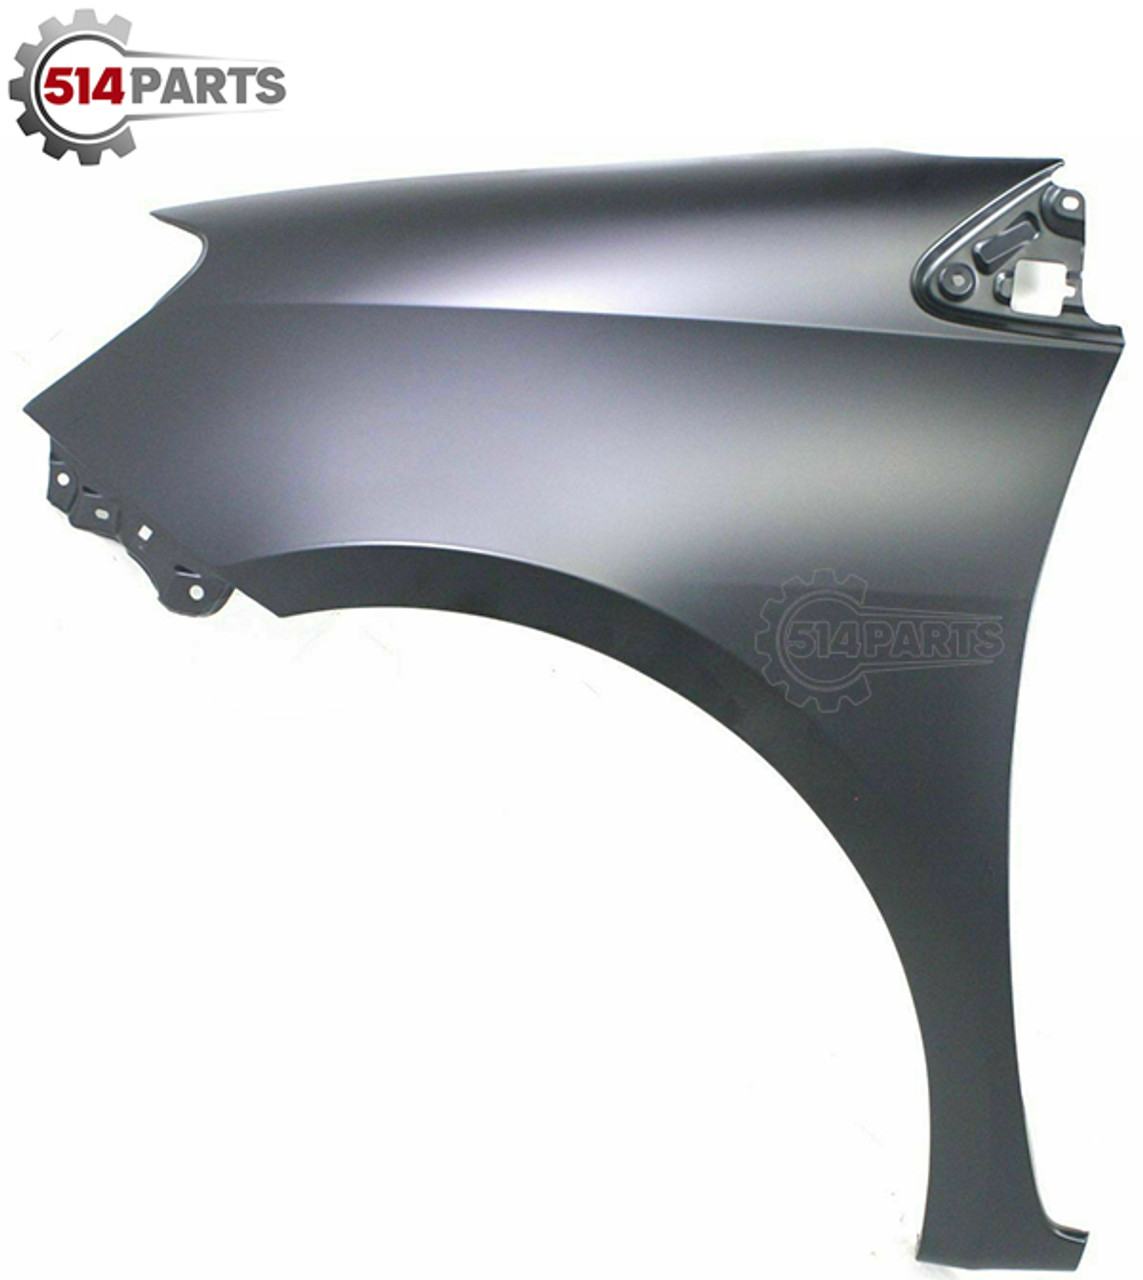 2004 - 2010 TOYOTA SIENNA FRONT FENDERS without ANTENNA HOLE - AILES AVANT sans TROU D'ANTENNE